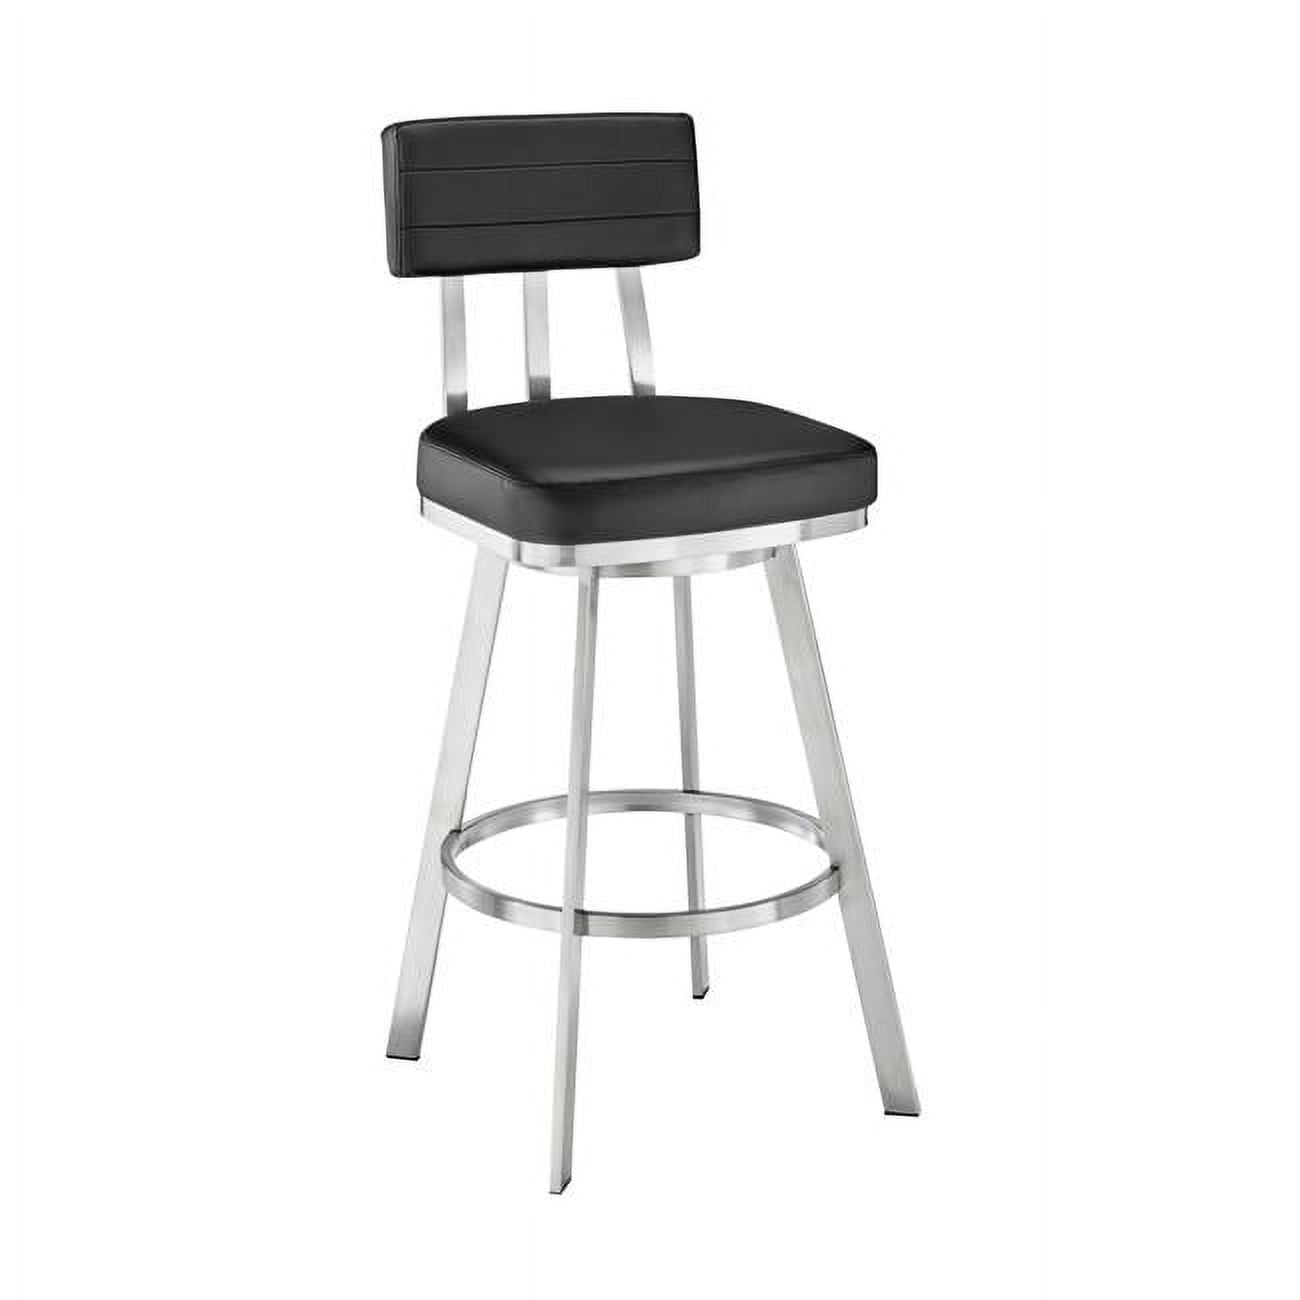 Picture of Armen Living 840254335271 42 x 17.5 x 21 in. Jinab Swivel Bar Stool in Brushed Stainless Steel with Black Faux Leather